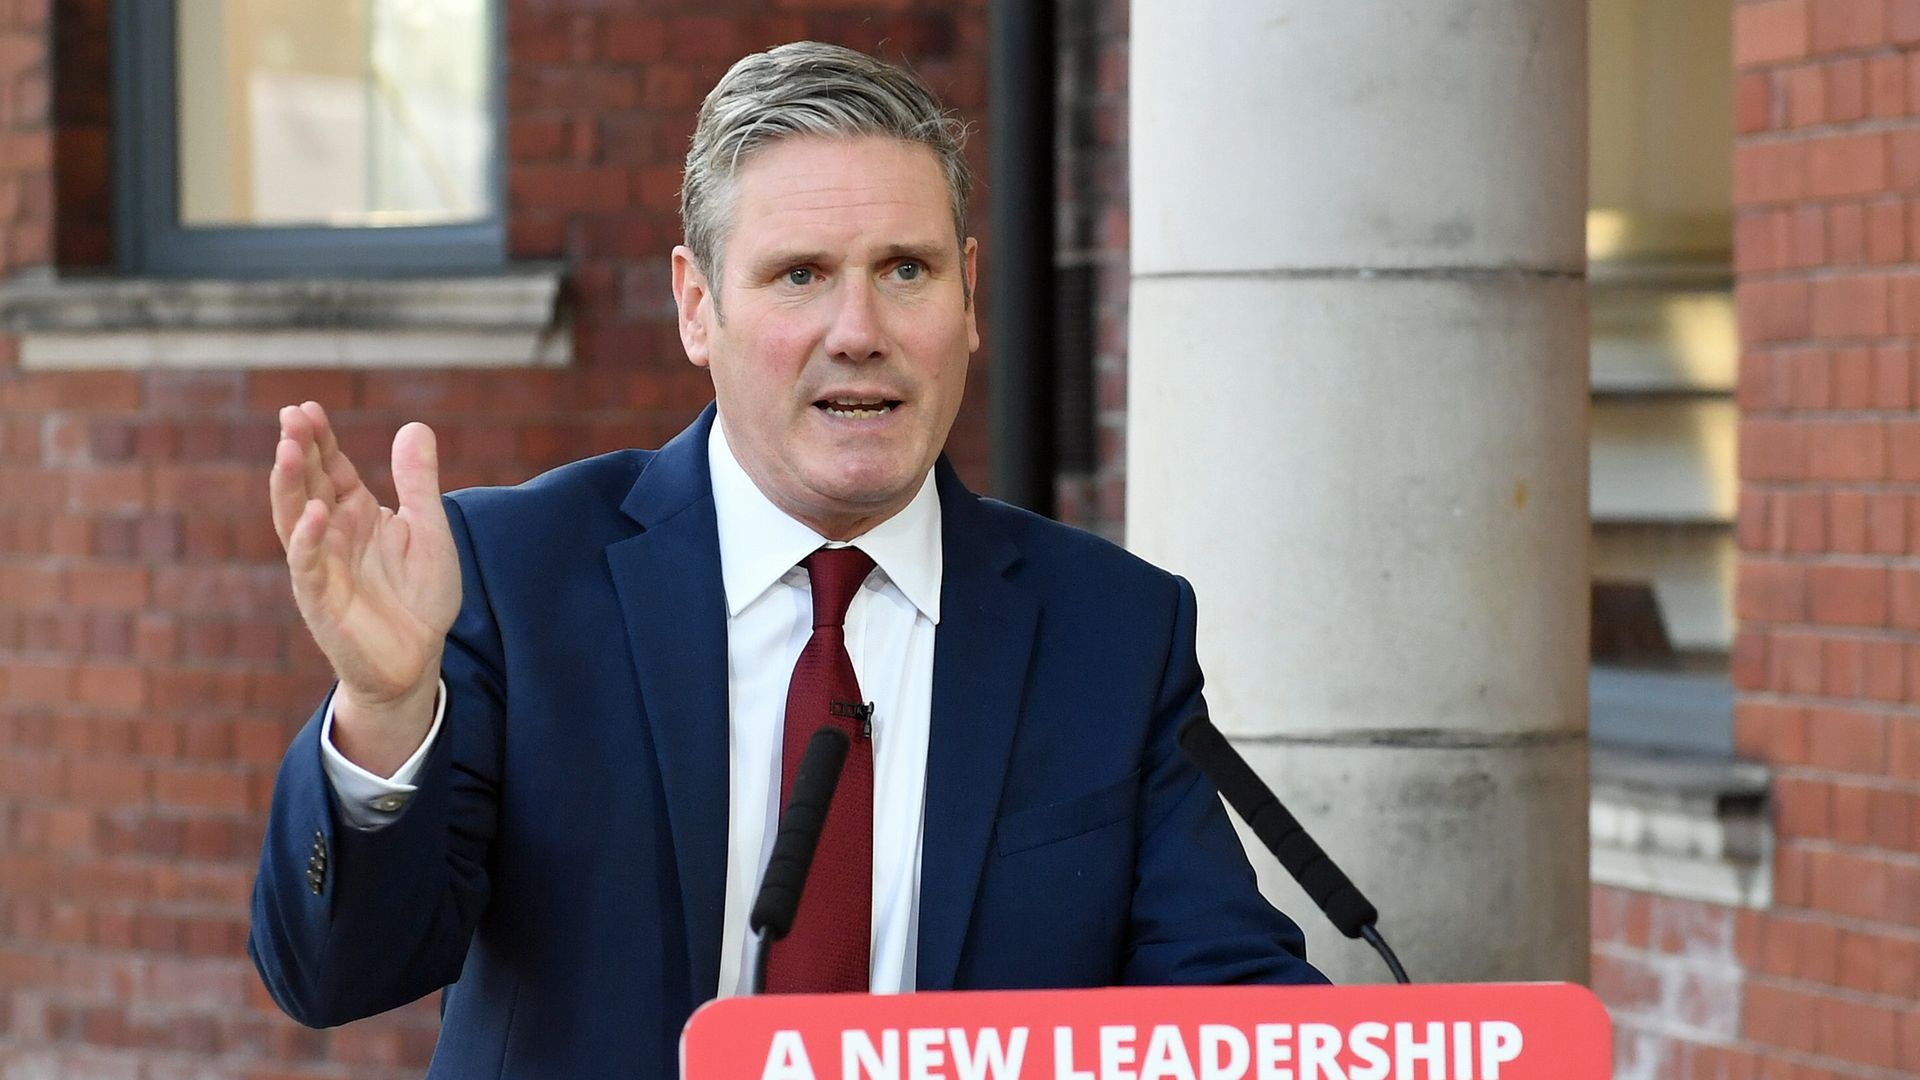 Labour leader Sir Keir Starmer delivers his keynote speech during the party's online conference - Credit: PA